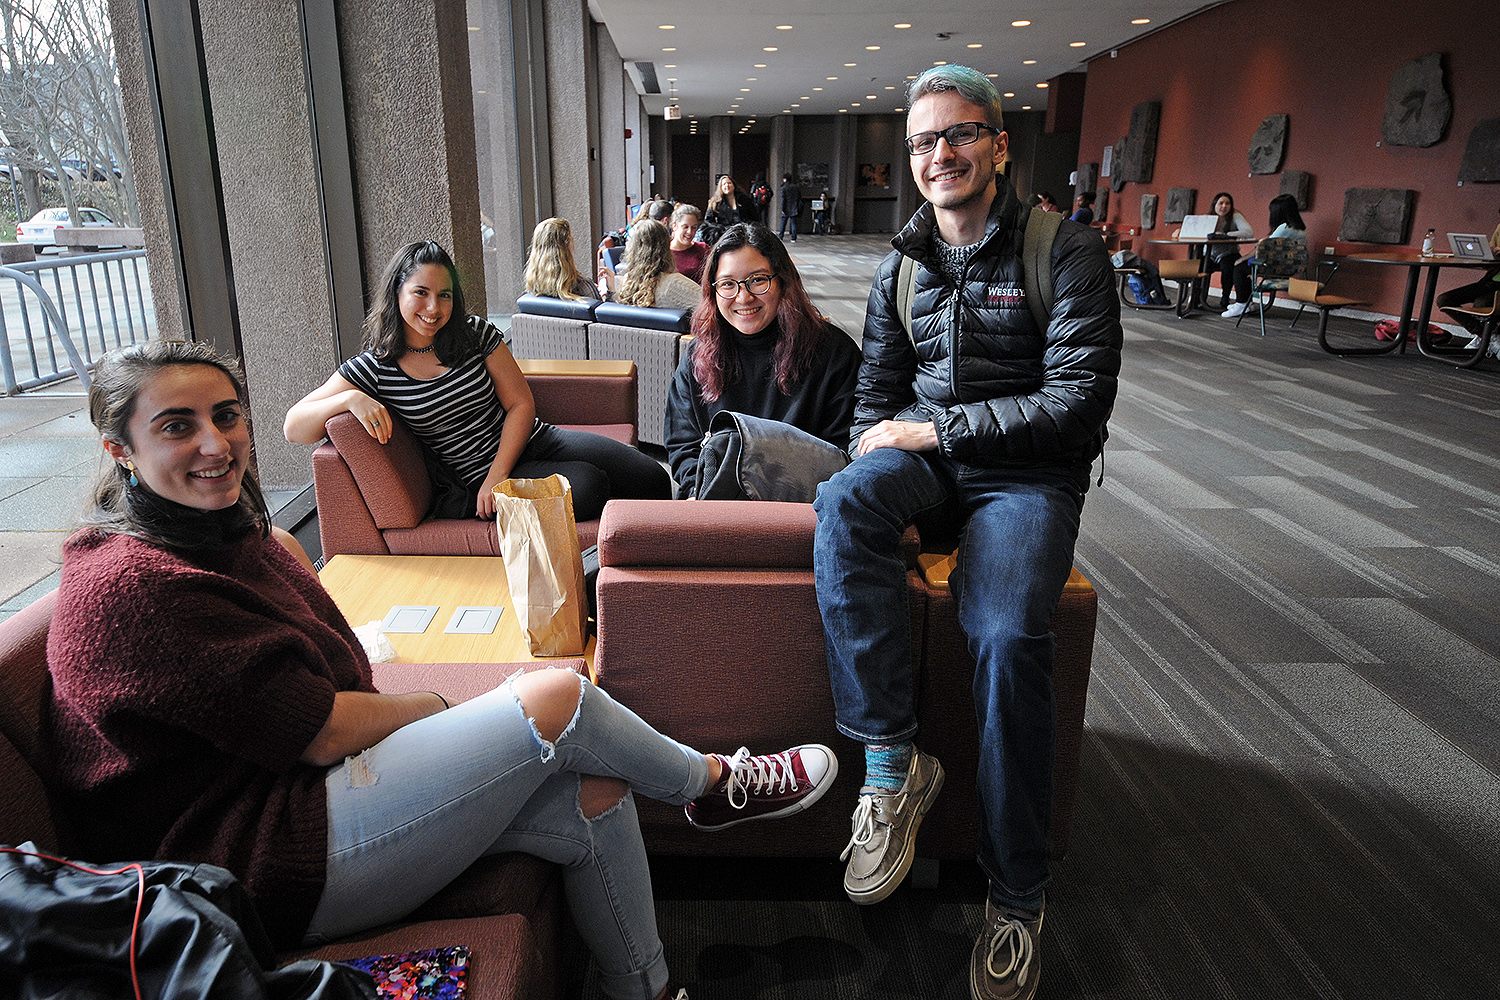 Classmates Ali Friend ’19, Teresa Naval ’19, Alexis Jimenee ’19 and Daniel Shaheen ’19 gathered in Exley Science Center over lunch. Ali, who visited family in Toronto, Canada over Winter Recess, says she missed the Wesleyan squirrels. “In Canada, the squirrels are black and twice as big as the gray squirrels. They are friendly, too, but not nearly as cute as Wes Squirrels,” she said. 